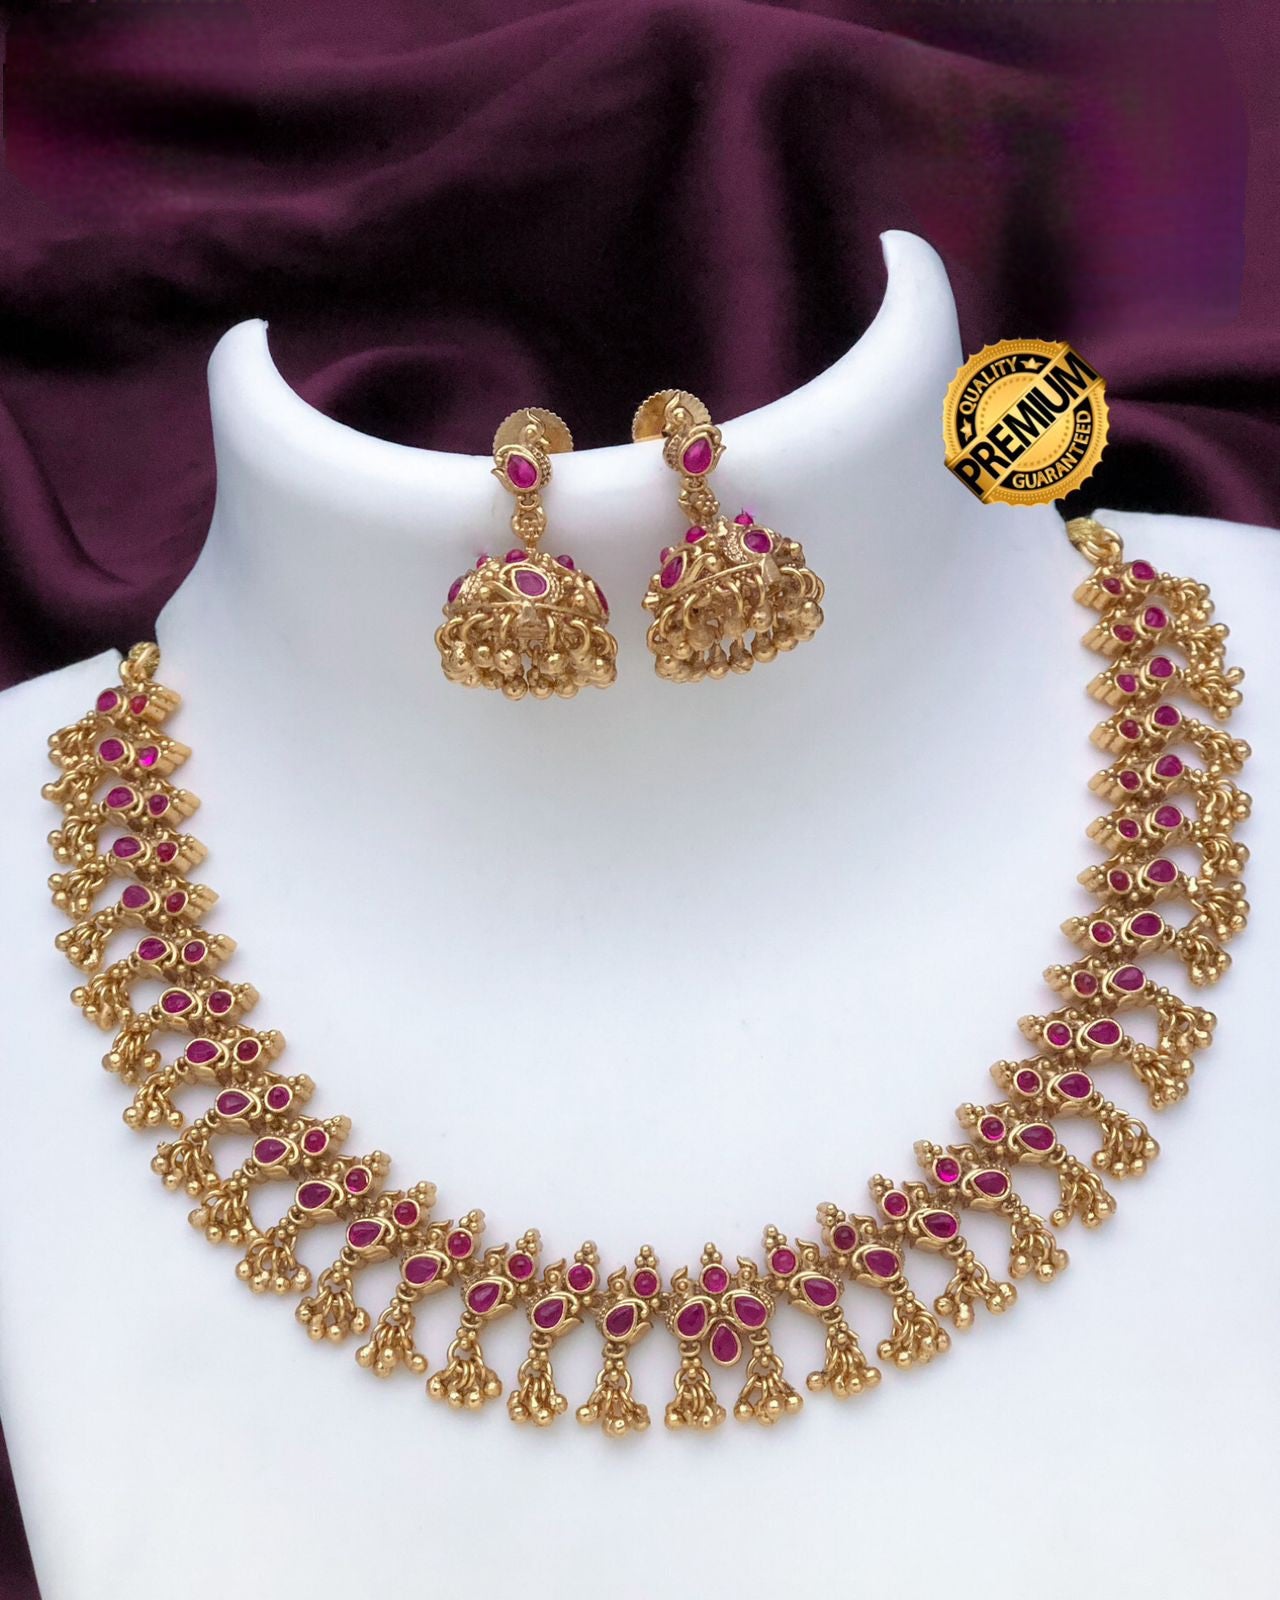 Exclusive South Indian style matte Gold necklace with Ruby Emerald stones and Jhumka Earrings | Simple choker Indian Temple Jewelry necklace | Gift for her